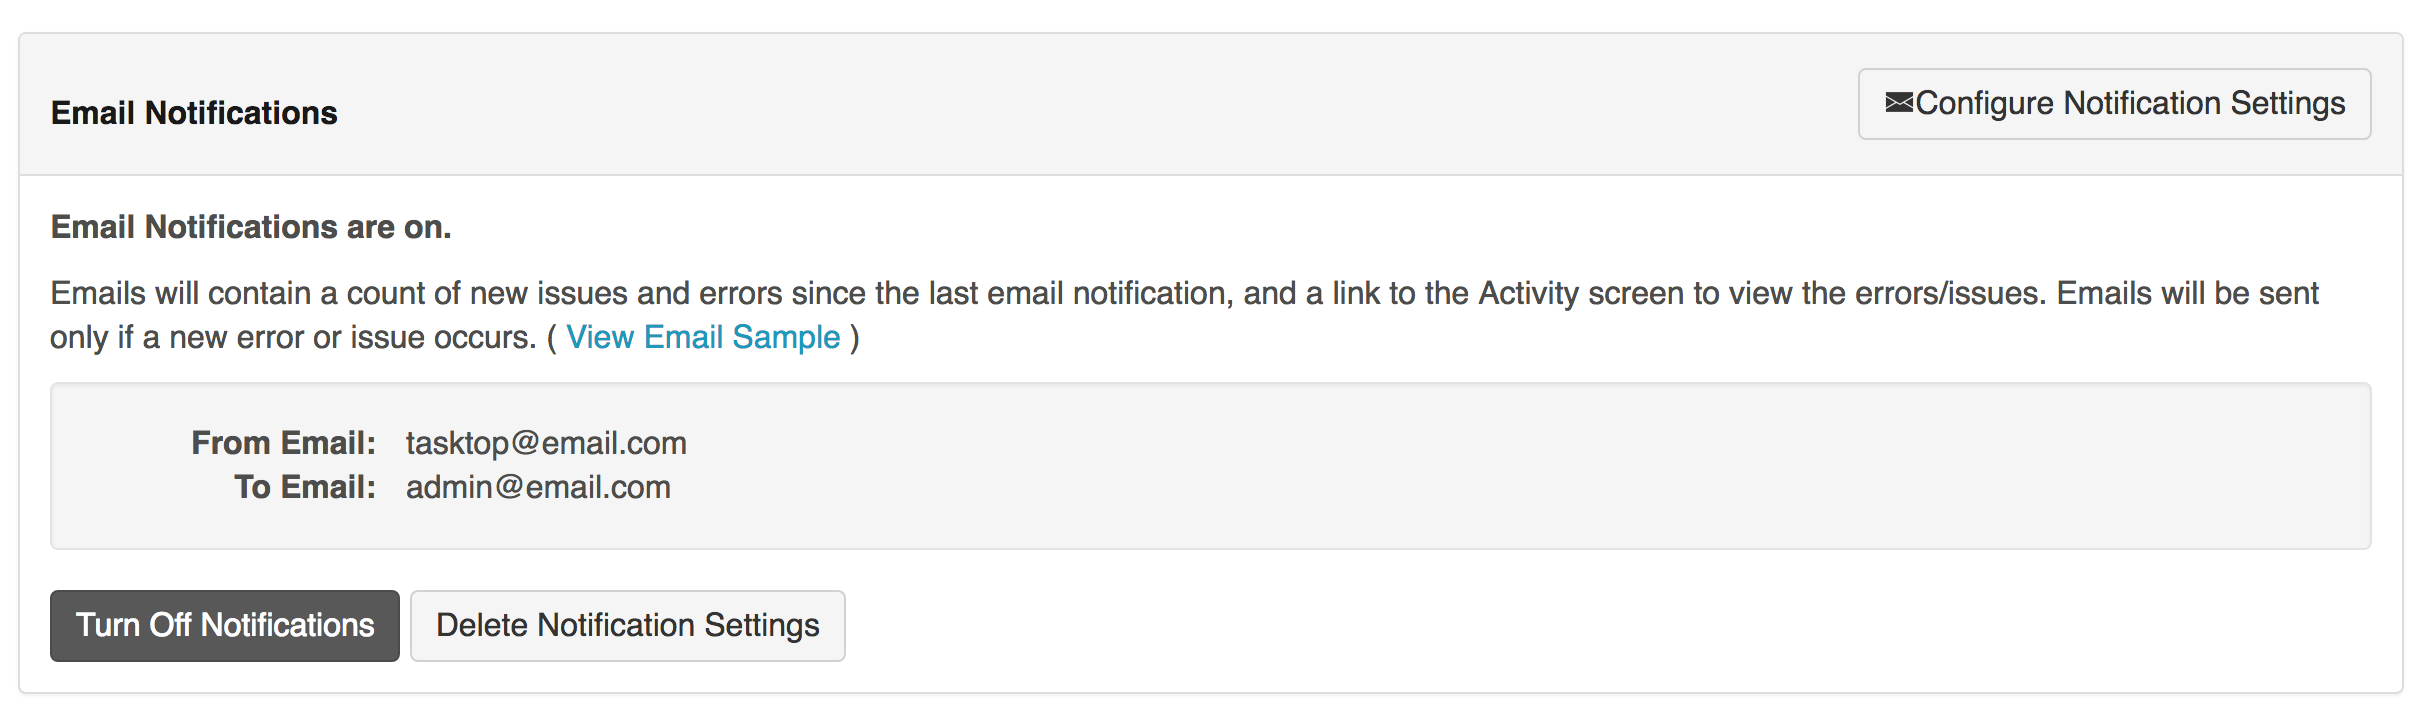 Update Email Notification Settings from Notifications Screen